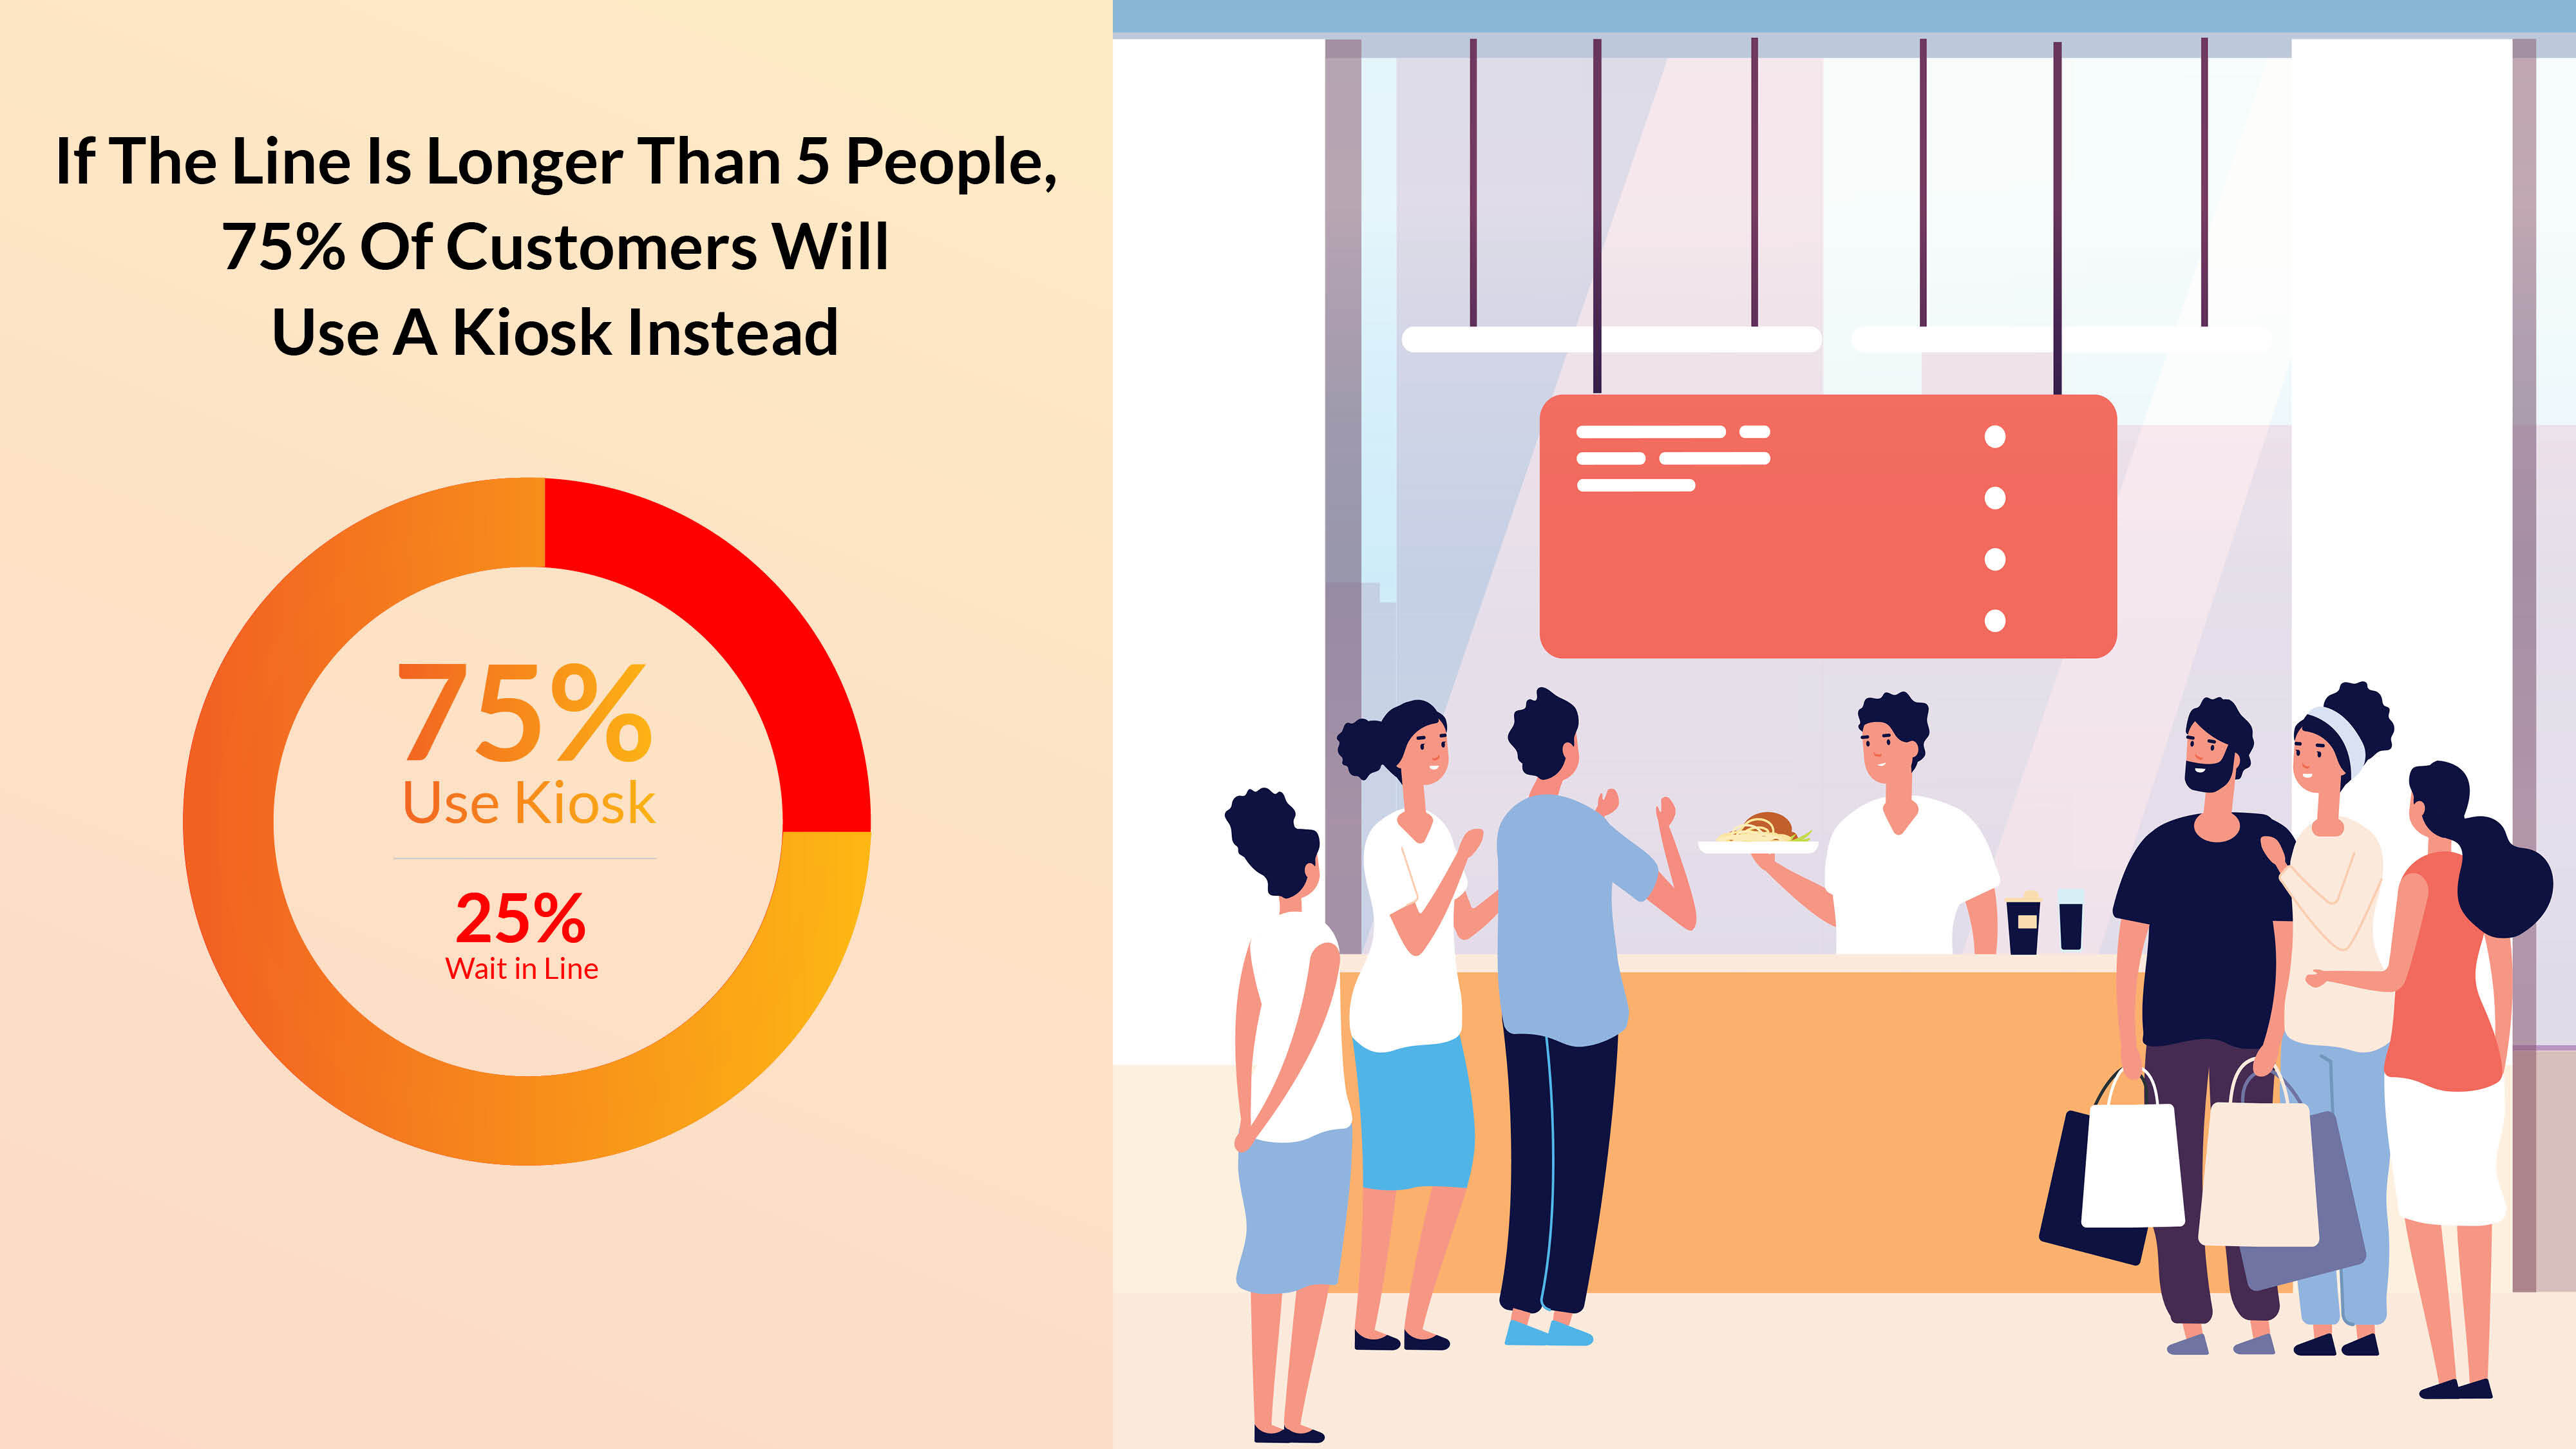 If the line is longer than 5 people, 75% of customers will use a kiosk instead